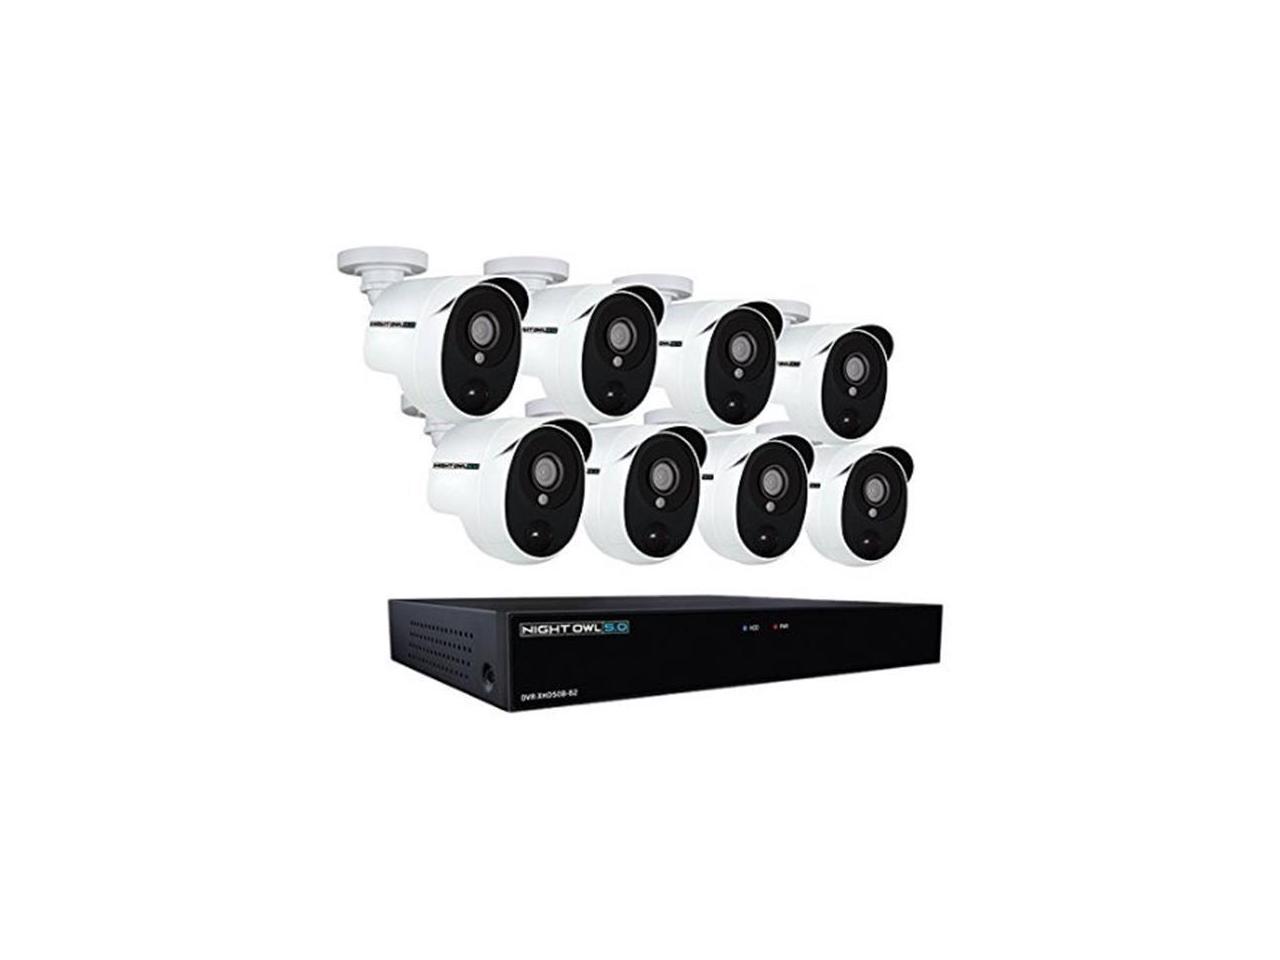 night owl 8 channel 5mp dvr wired security system